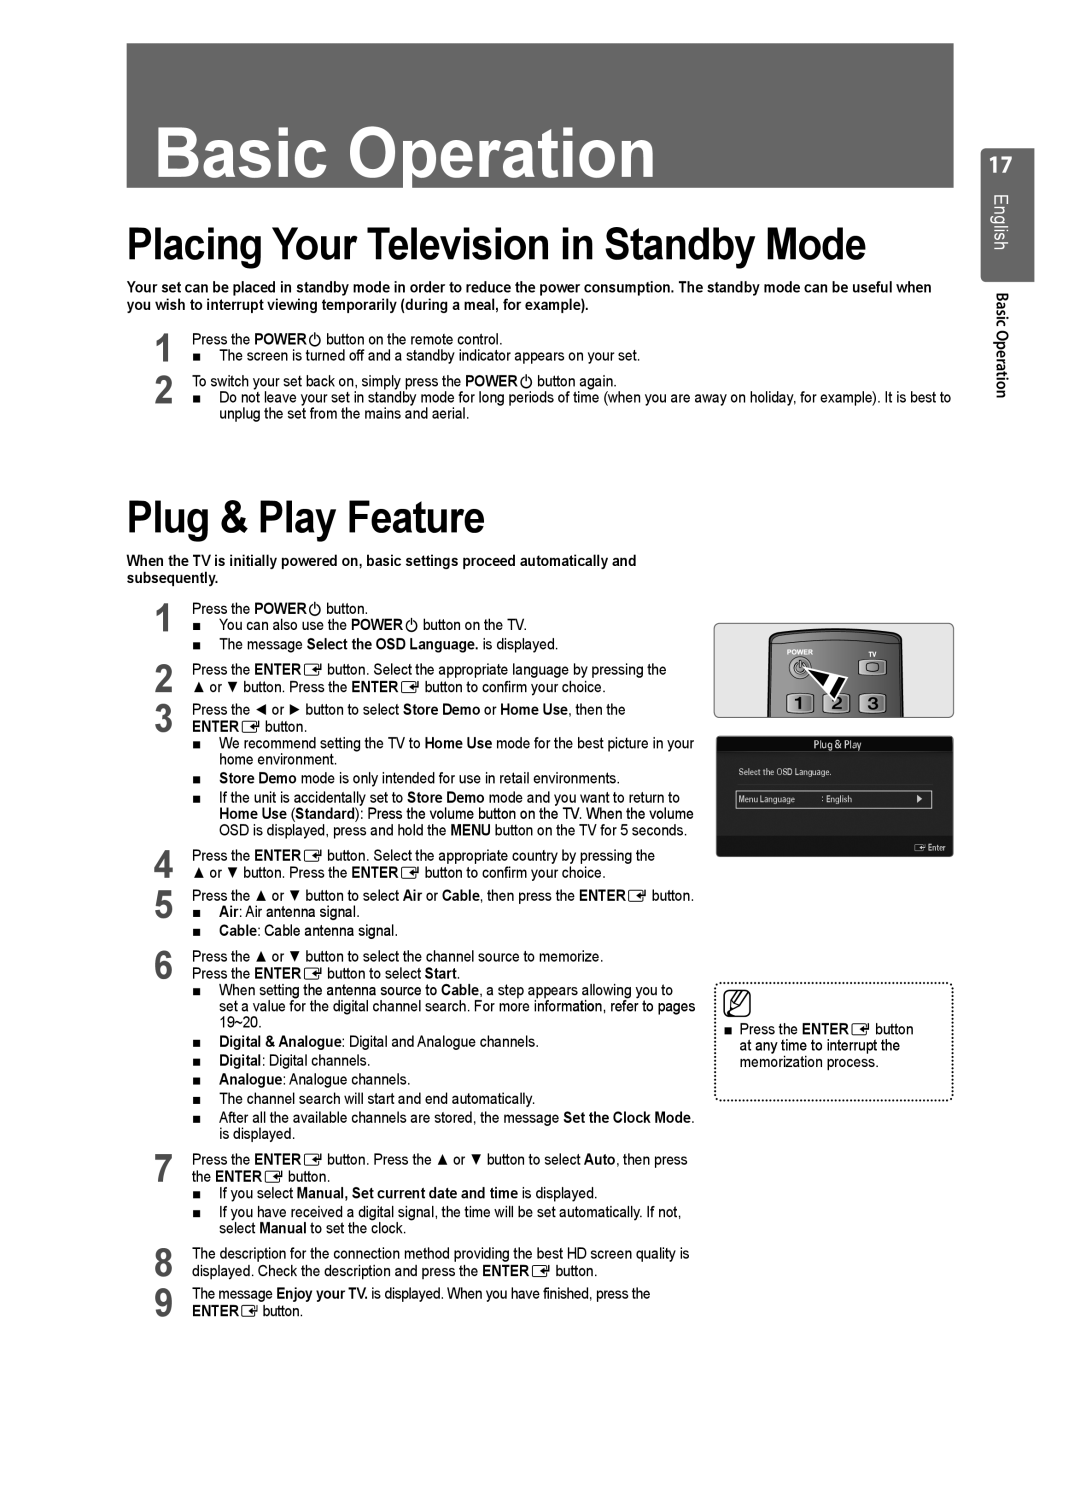 Samsung LE40B554, LE40B550 Plug & Play Feature, Placing Your Television in Standby Mode, English Basic Operation 